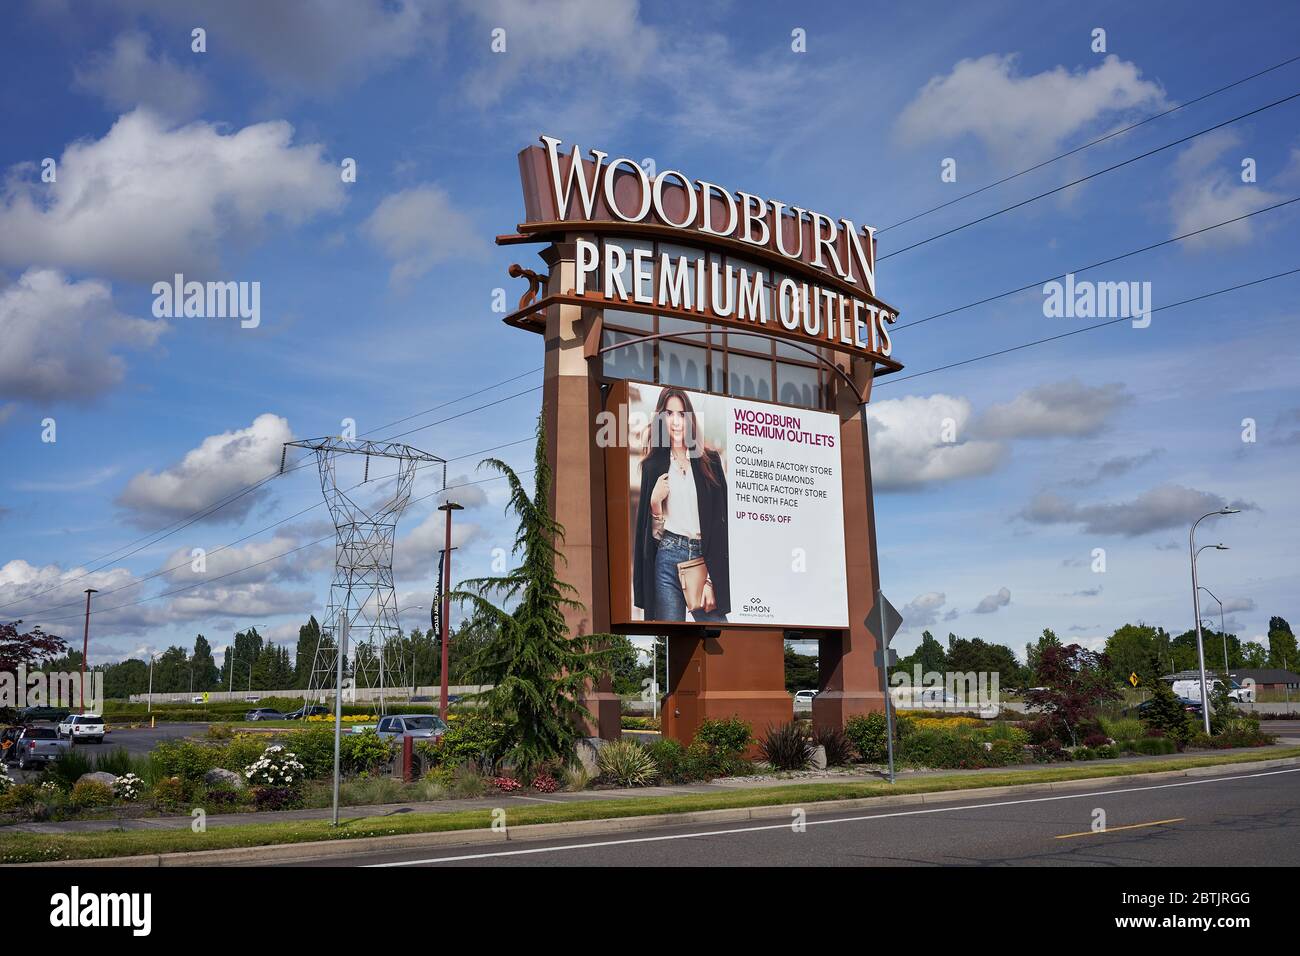 Woodburn Premium Outlets, an outlet mall in Woodburn, Oregon, reopened on  Memorial Day weekend after closing for over 2 months amid COVID-19 pandemic  Stock Photo - Alamy